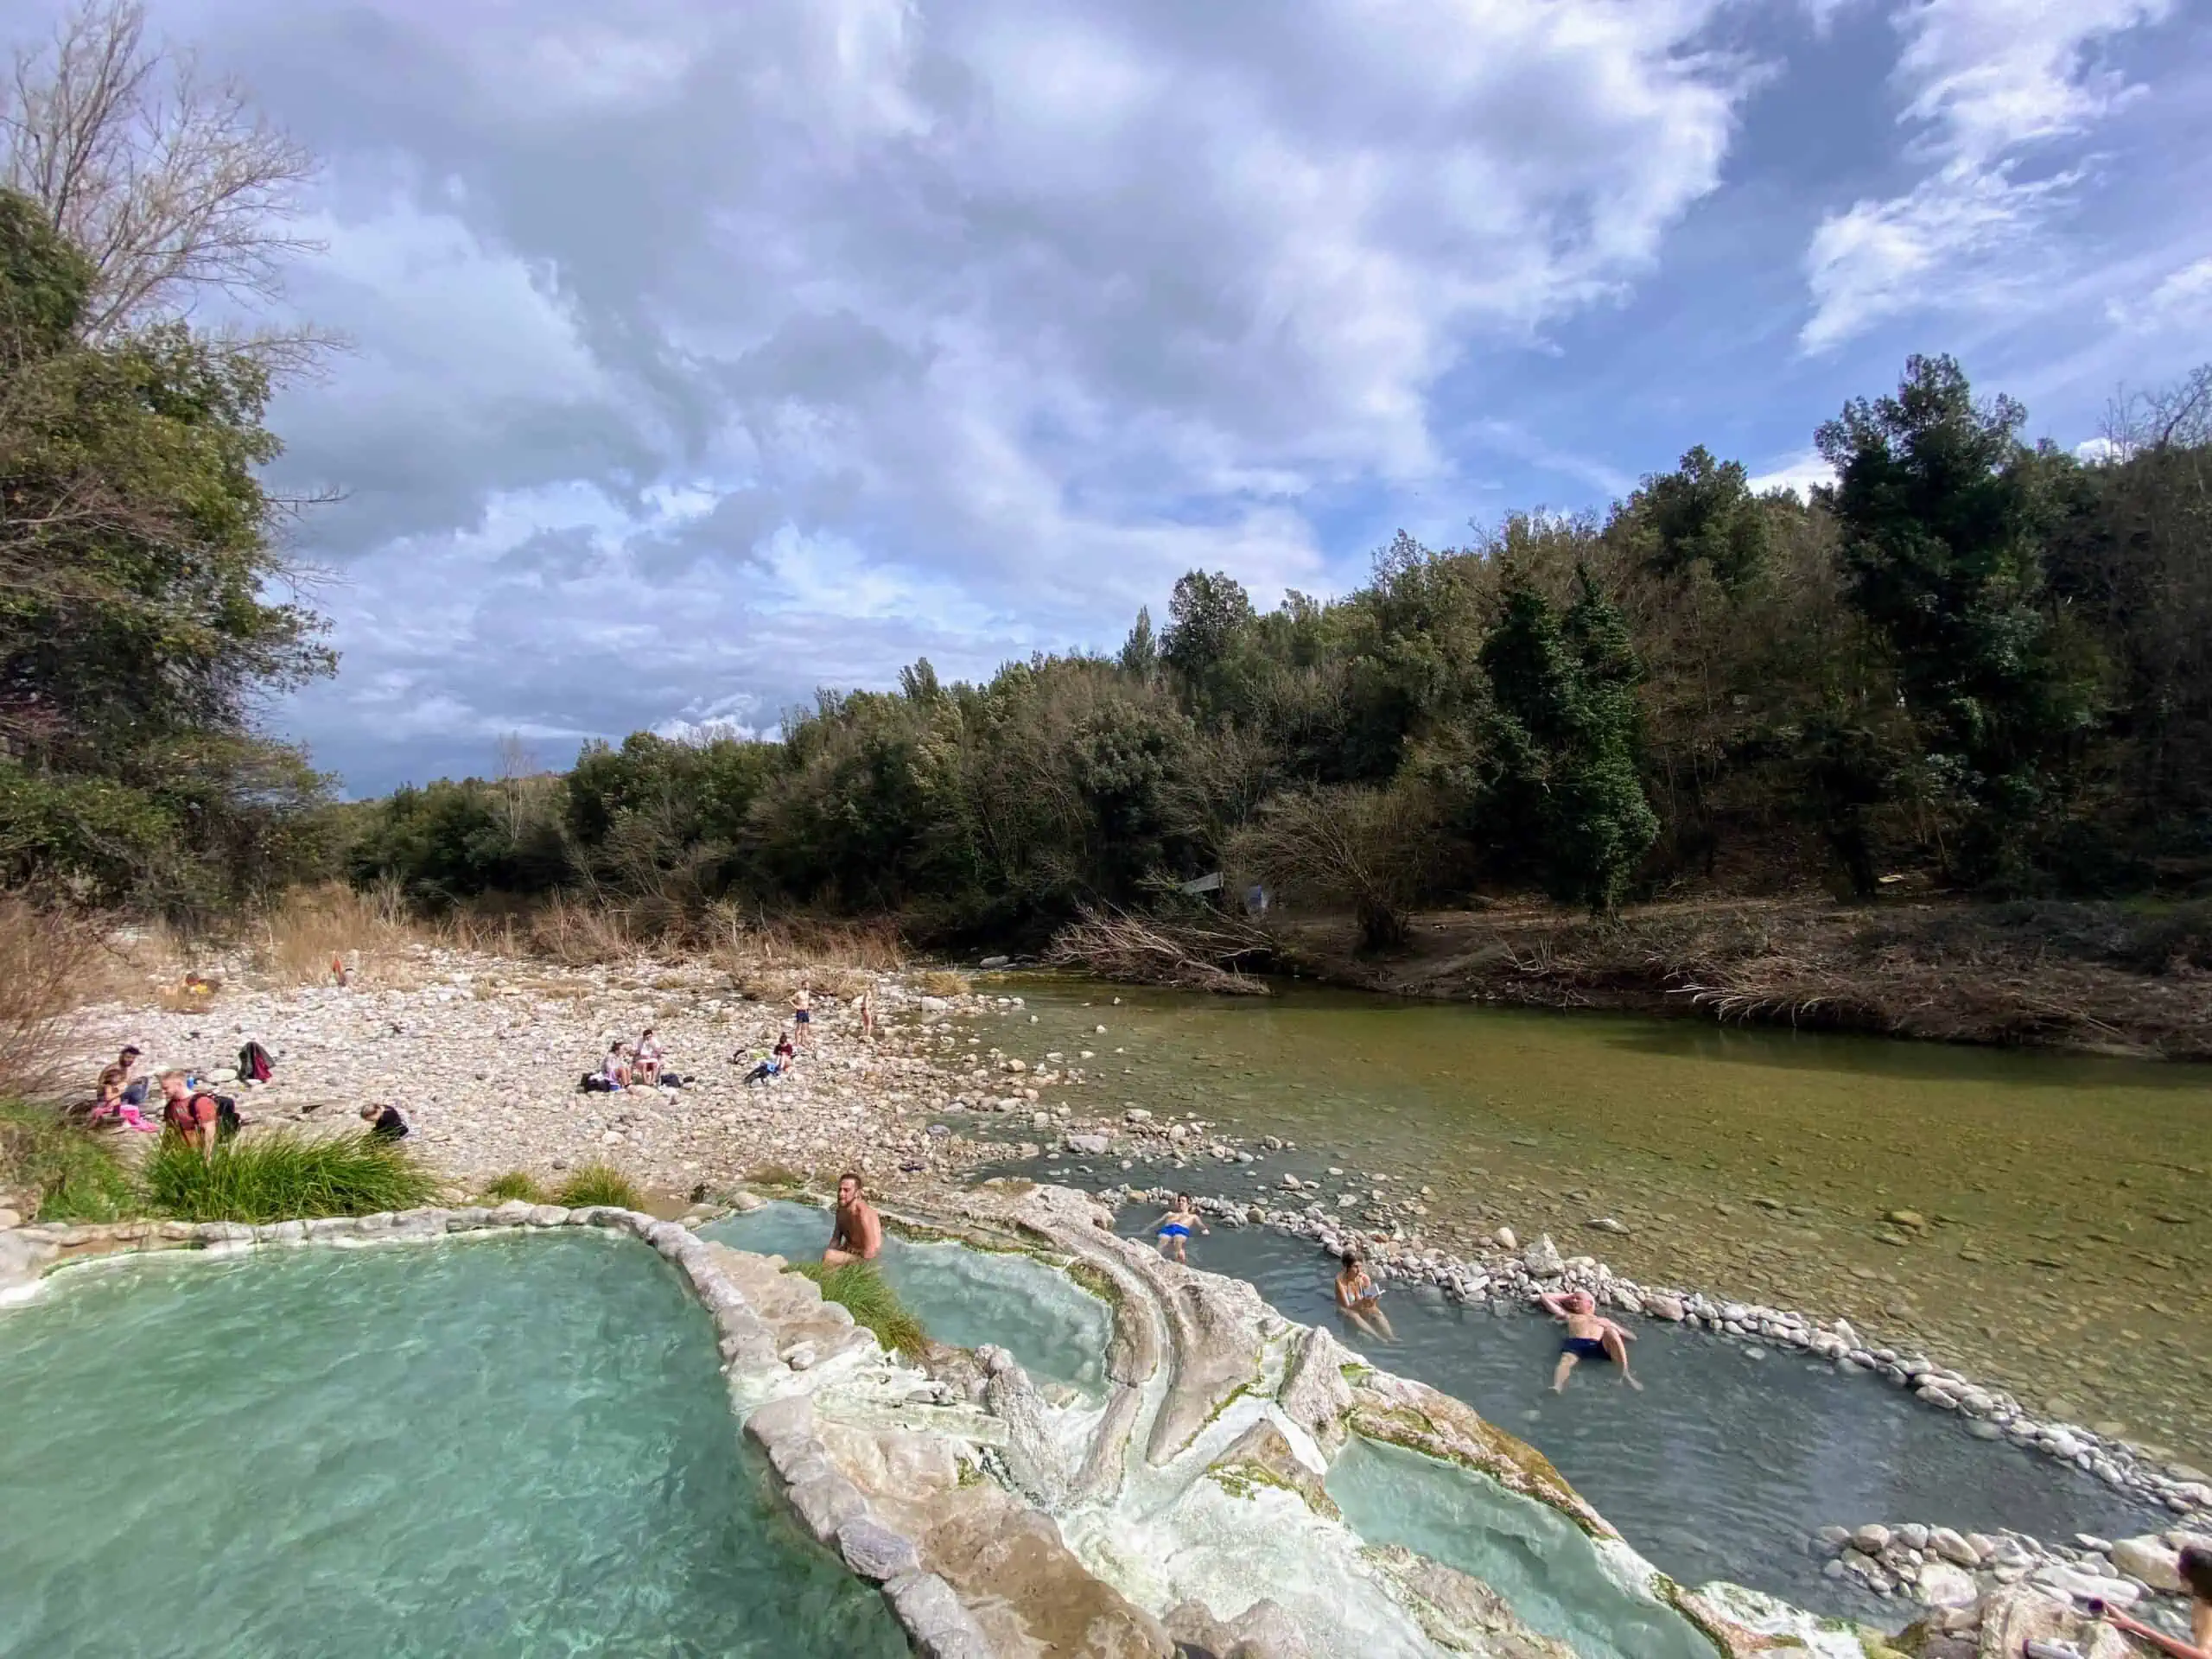 Turquoise hot springs with a river and forest in the background. Sunny day with fluffy white clouds. People soaking in hot springs.